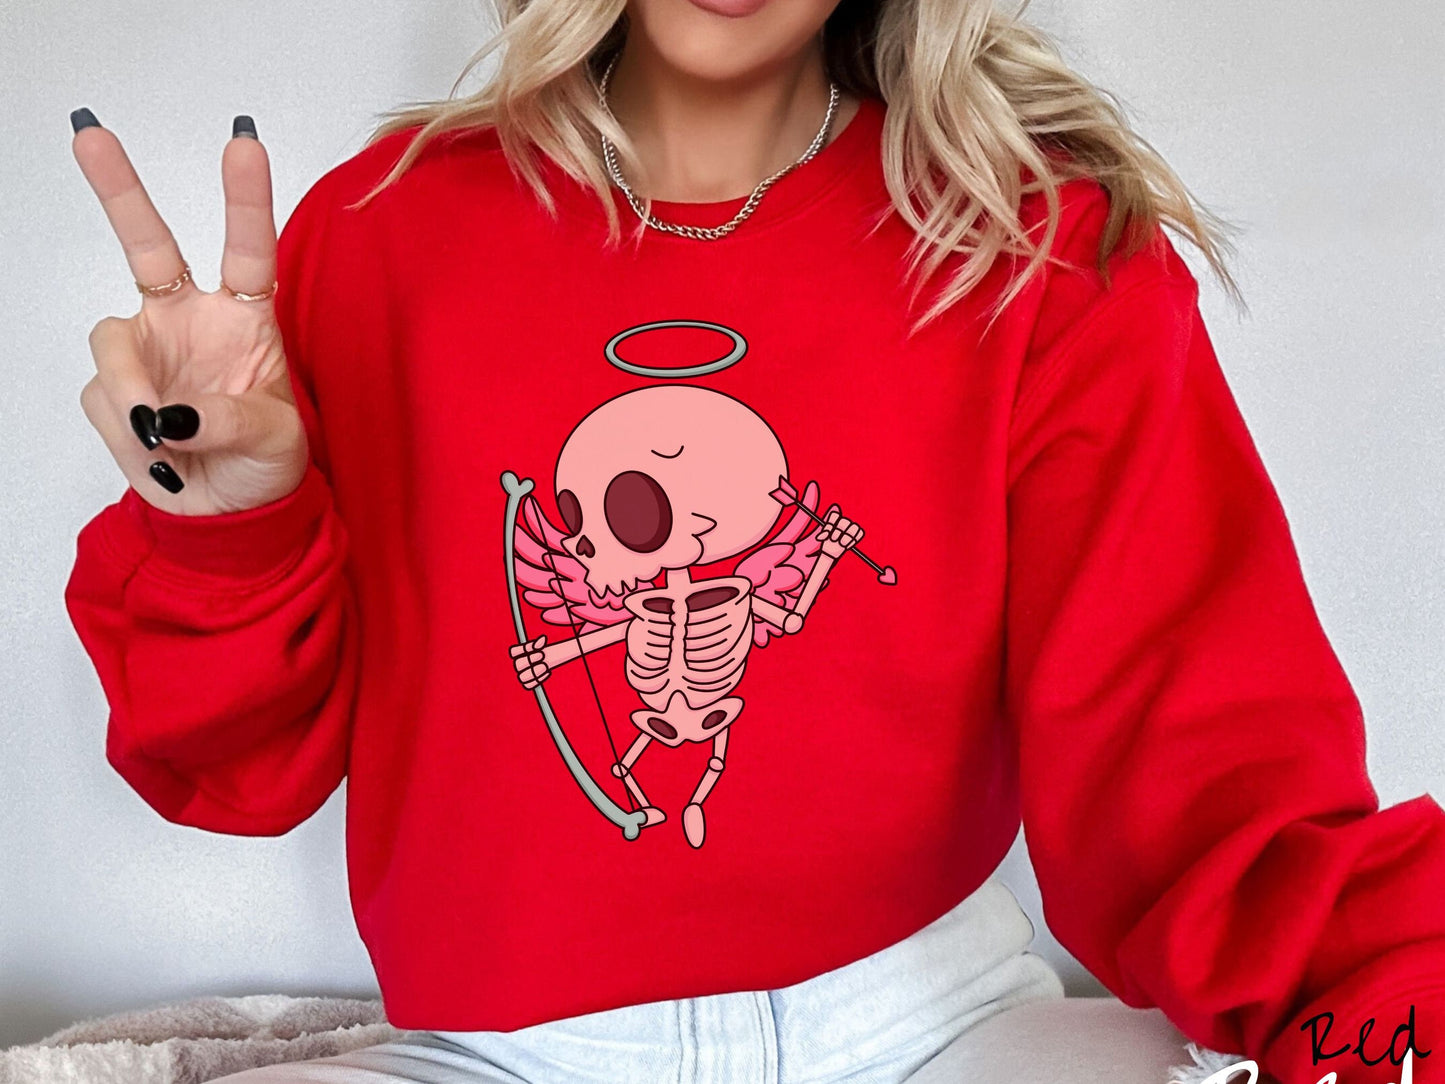 A woman wearing a cute red colored sweatshirt with a pink winged baby skeleton cupid with a halo holding a heart-tipped arrow in its left hand and a bow in its right hand.